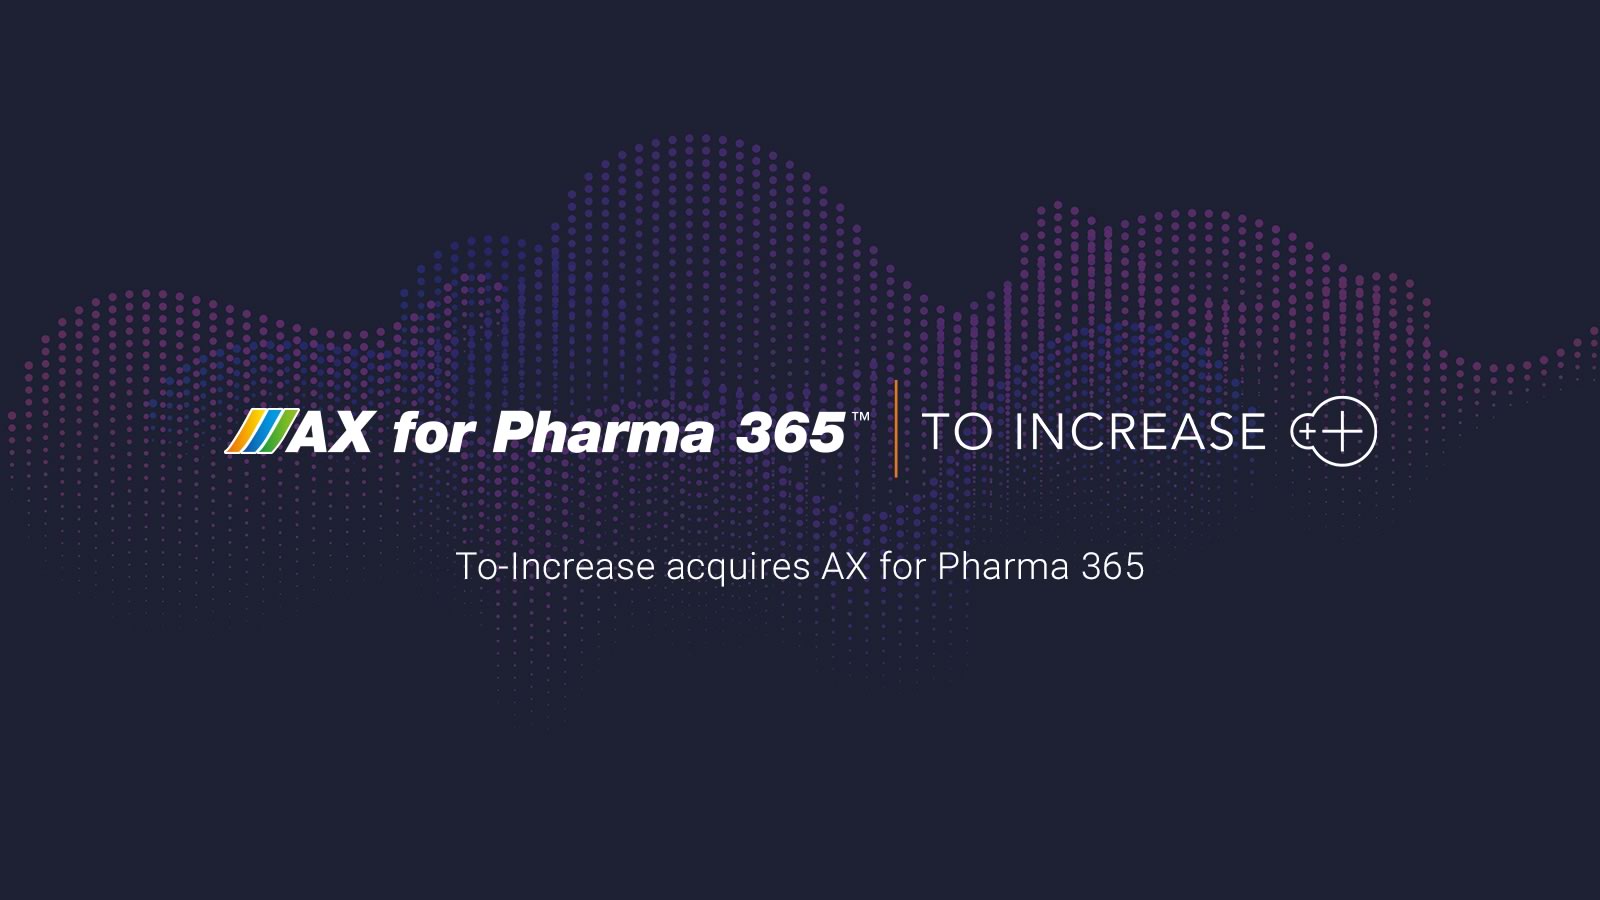 To-Increase acquires AX for Pharma 365